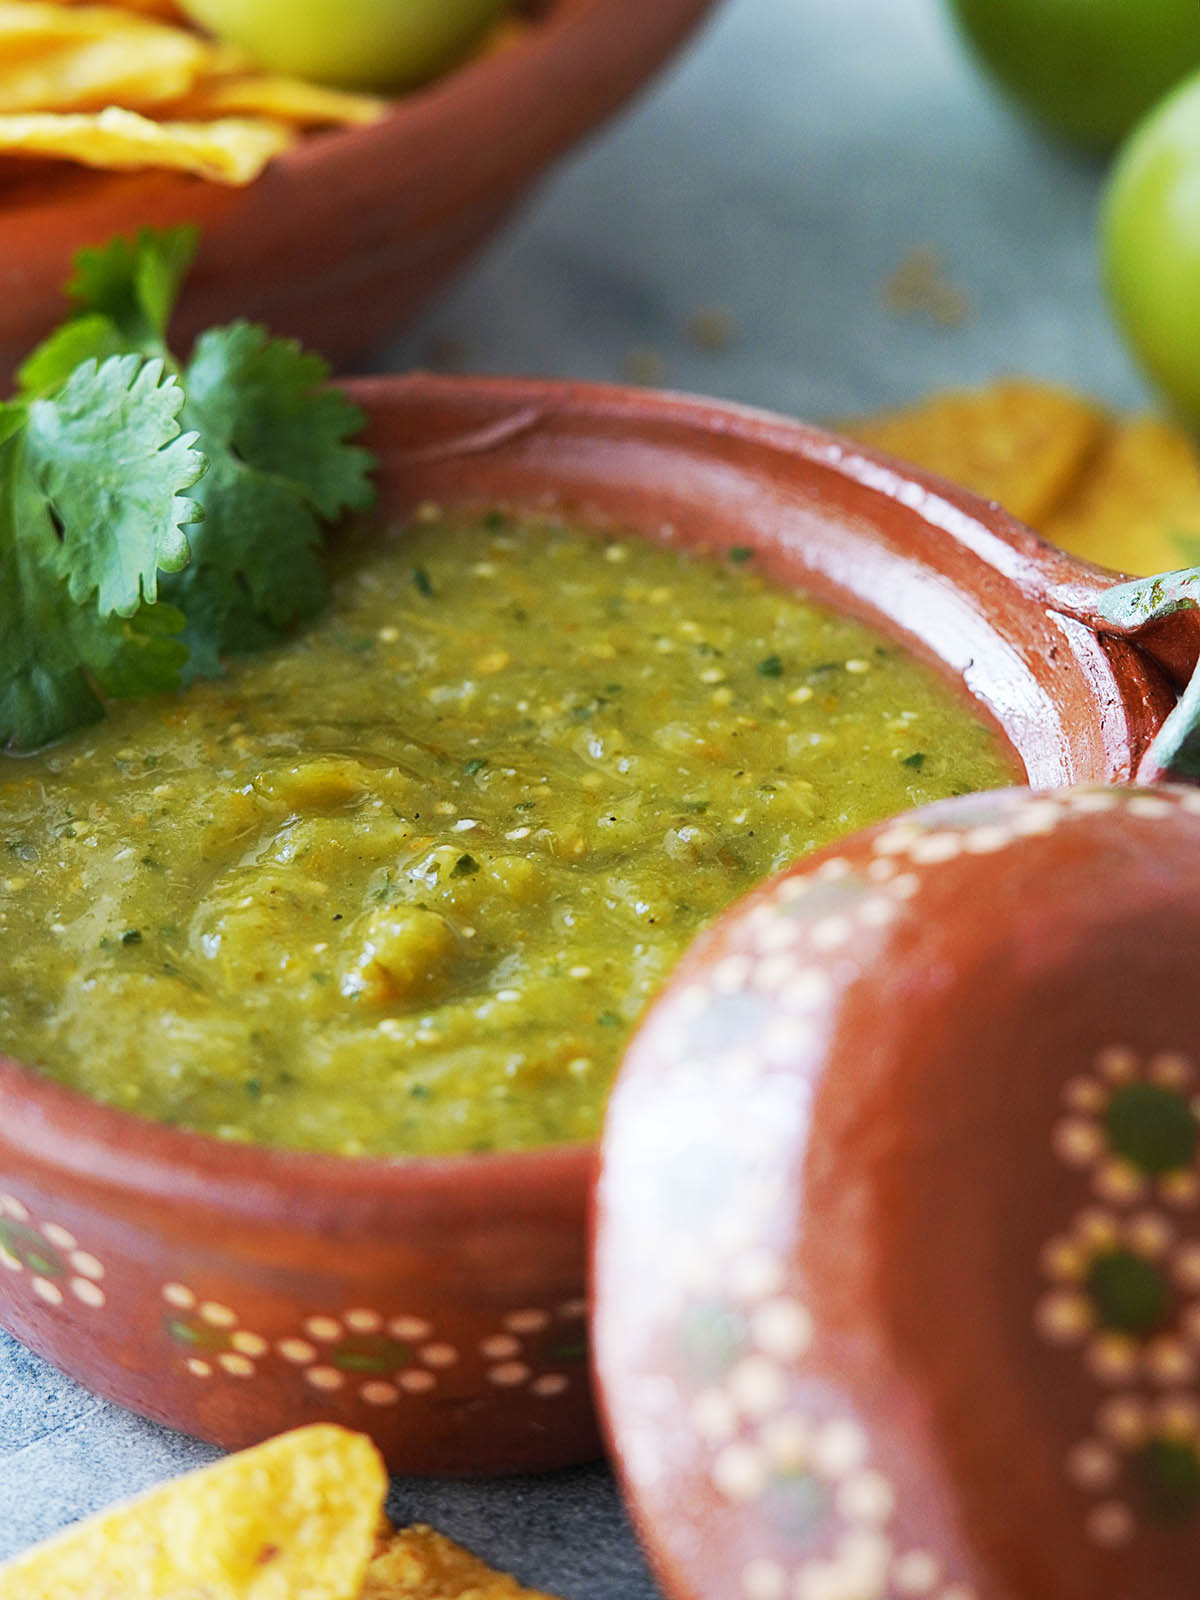 Salsa verde placed in a clay bowl with a wooden spoon.